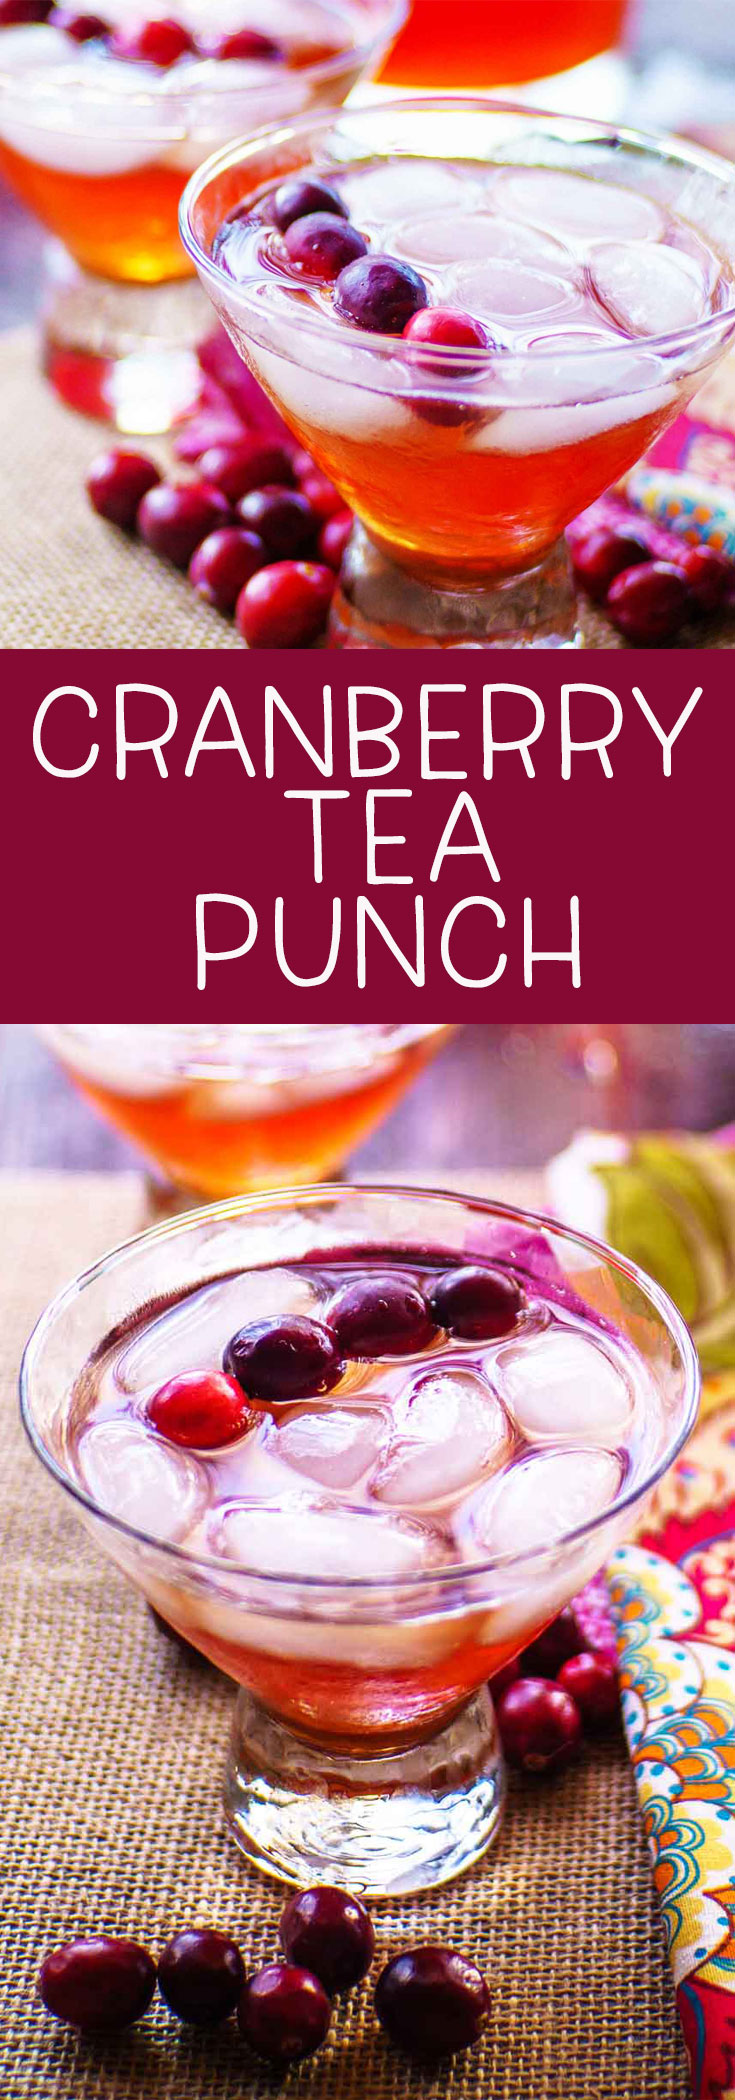 Cranberry tea punch is a perfect holiday beverage. It's a great mocktail full of Milo's sweet tea, cranberry cherry juice, and soda for bubbles. #ad @MilosTea #PassTheMilos #Pmedia  via @mrsmajorhoff